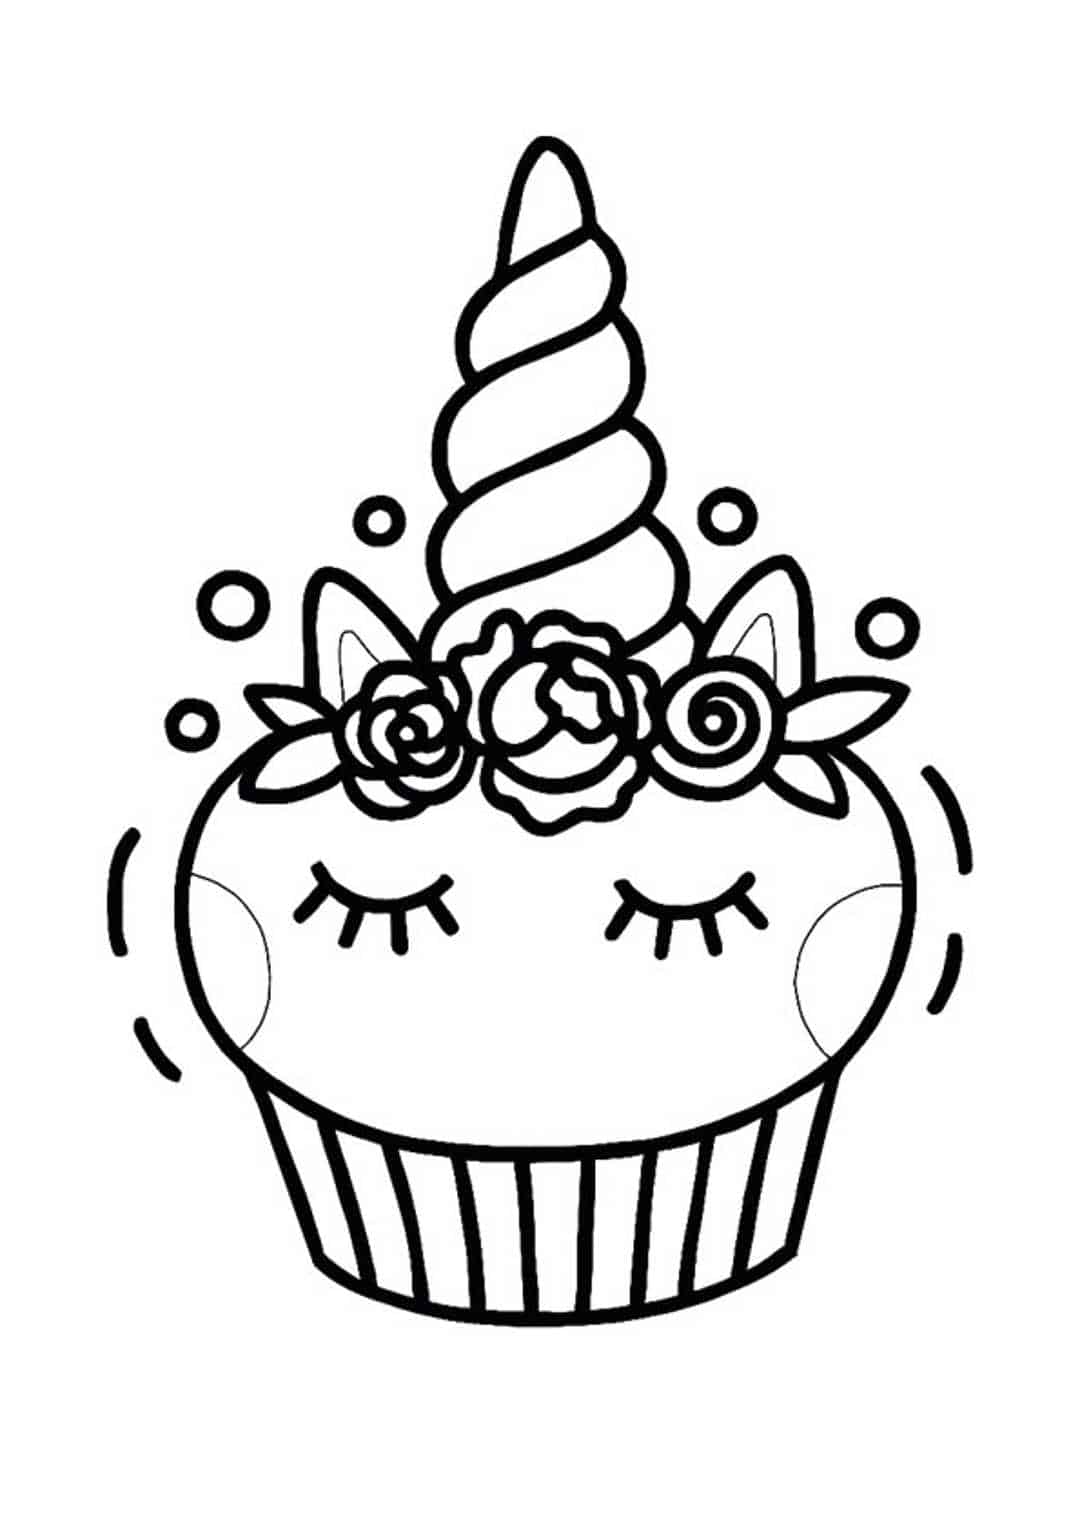 Unicorn Cake Coloring Pages - 6 Free Printable Coloring Pages (2020)